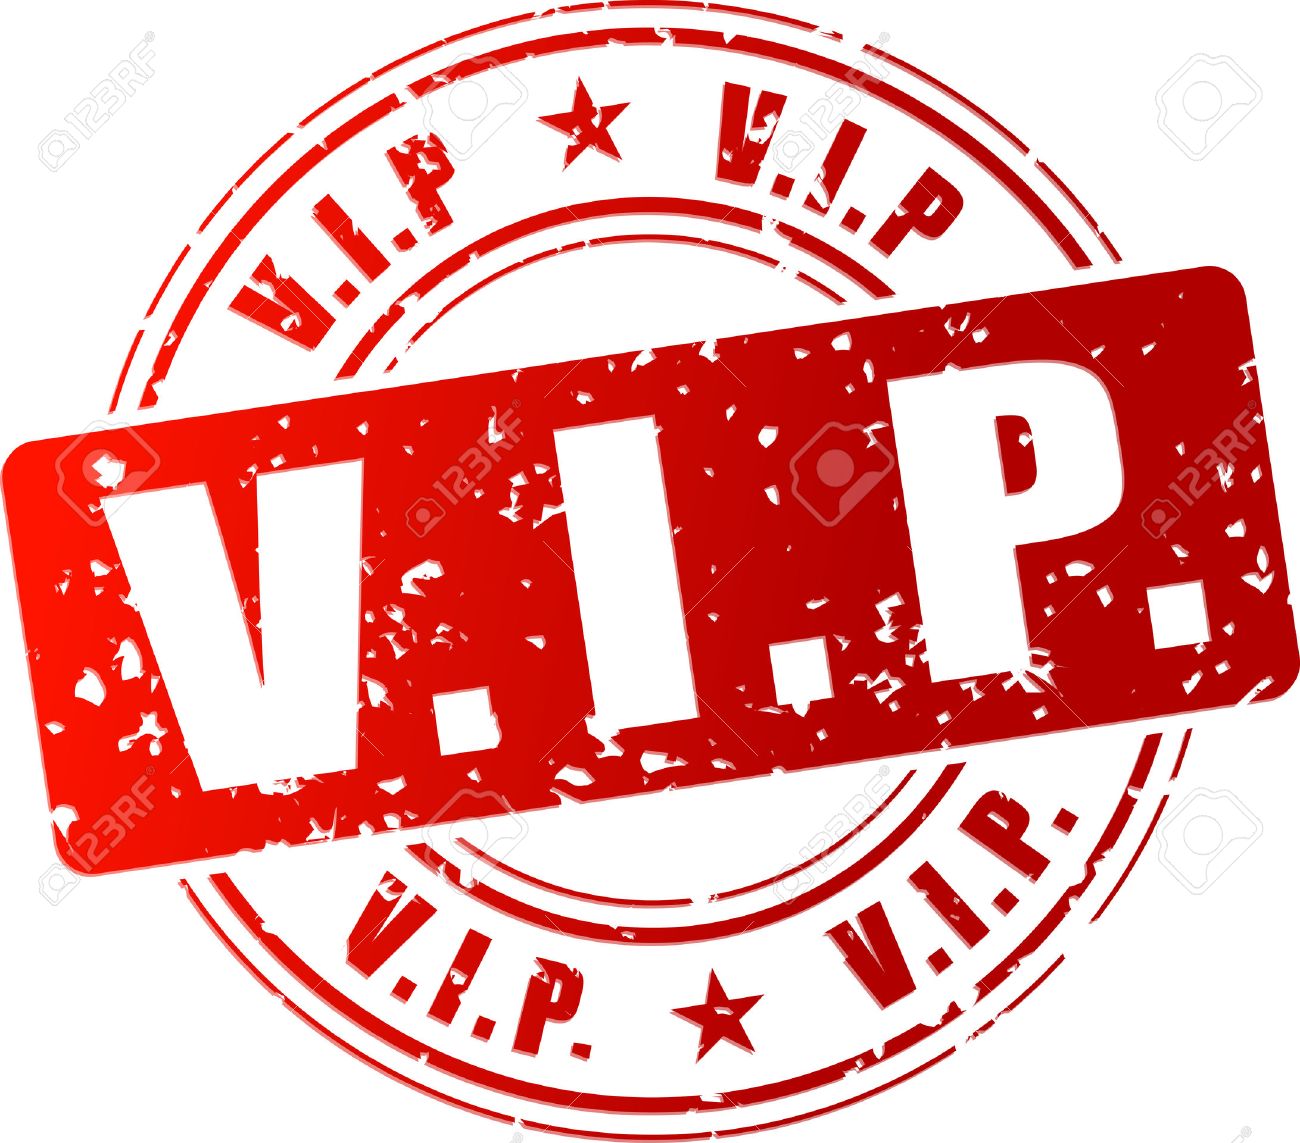 Join Our VIP Club